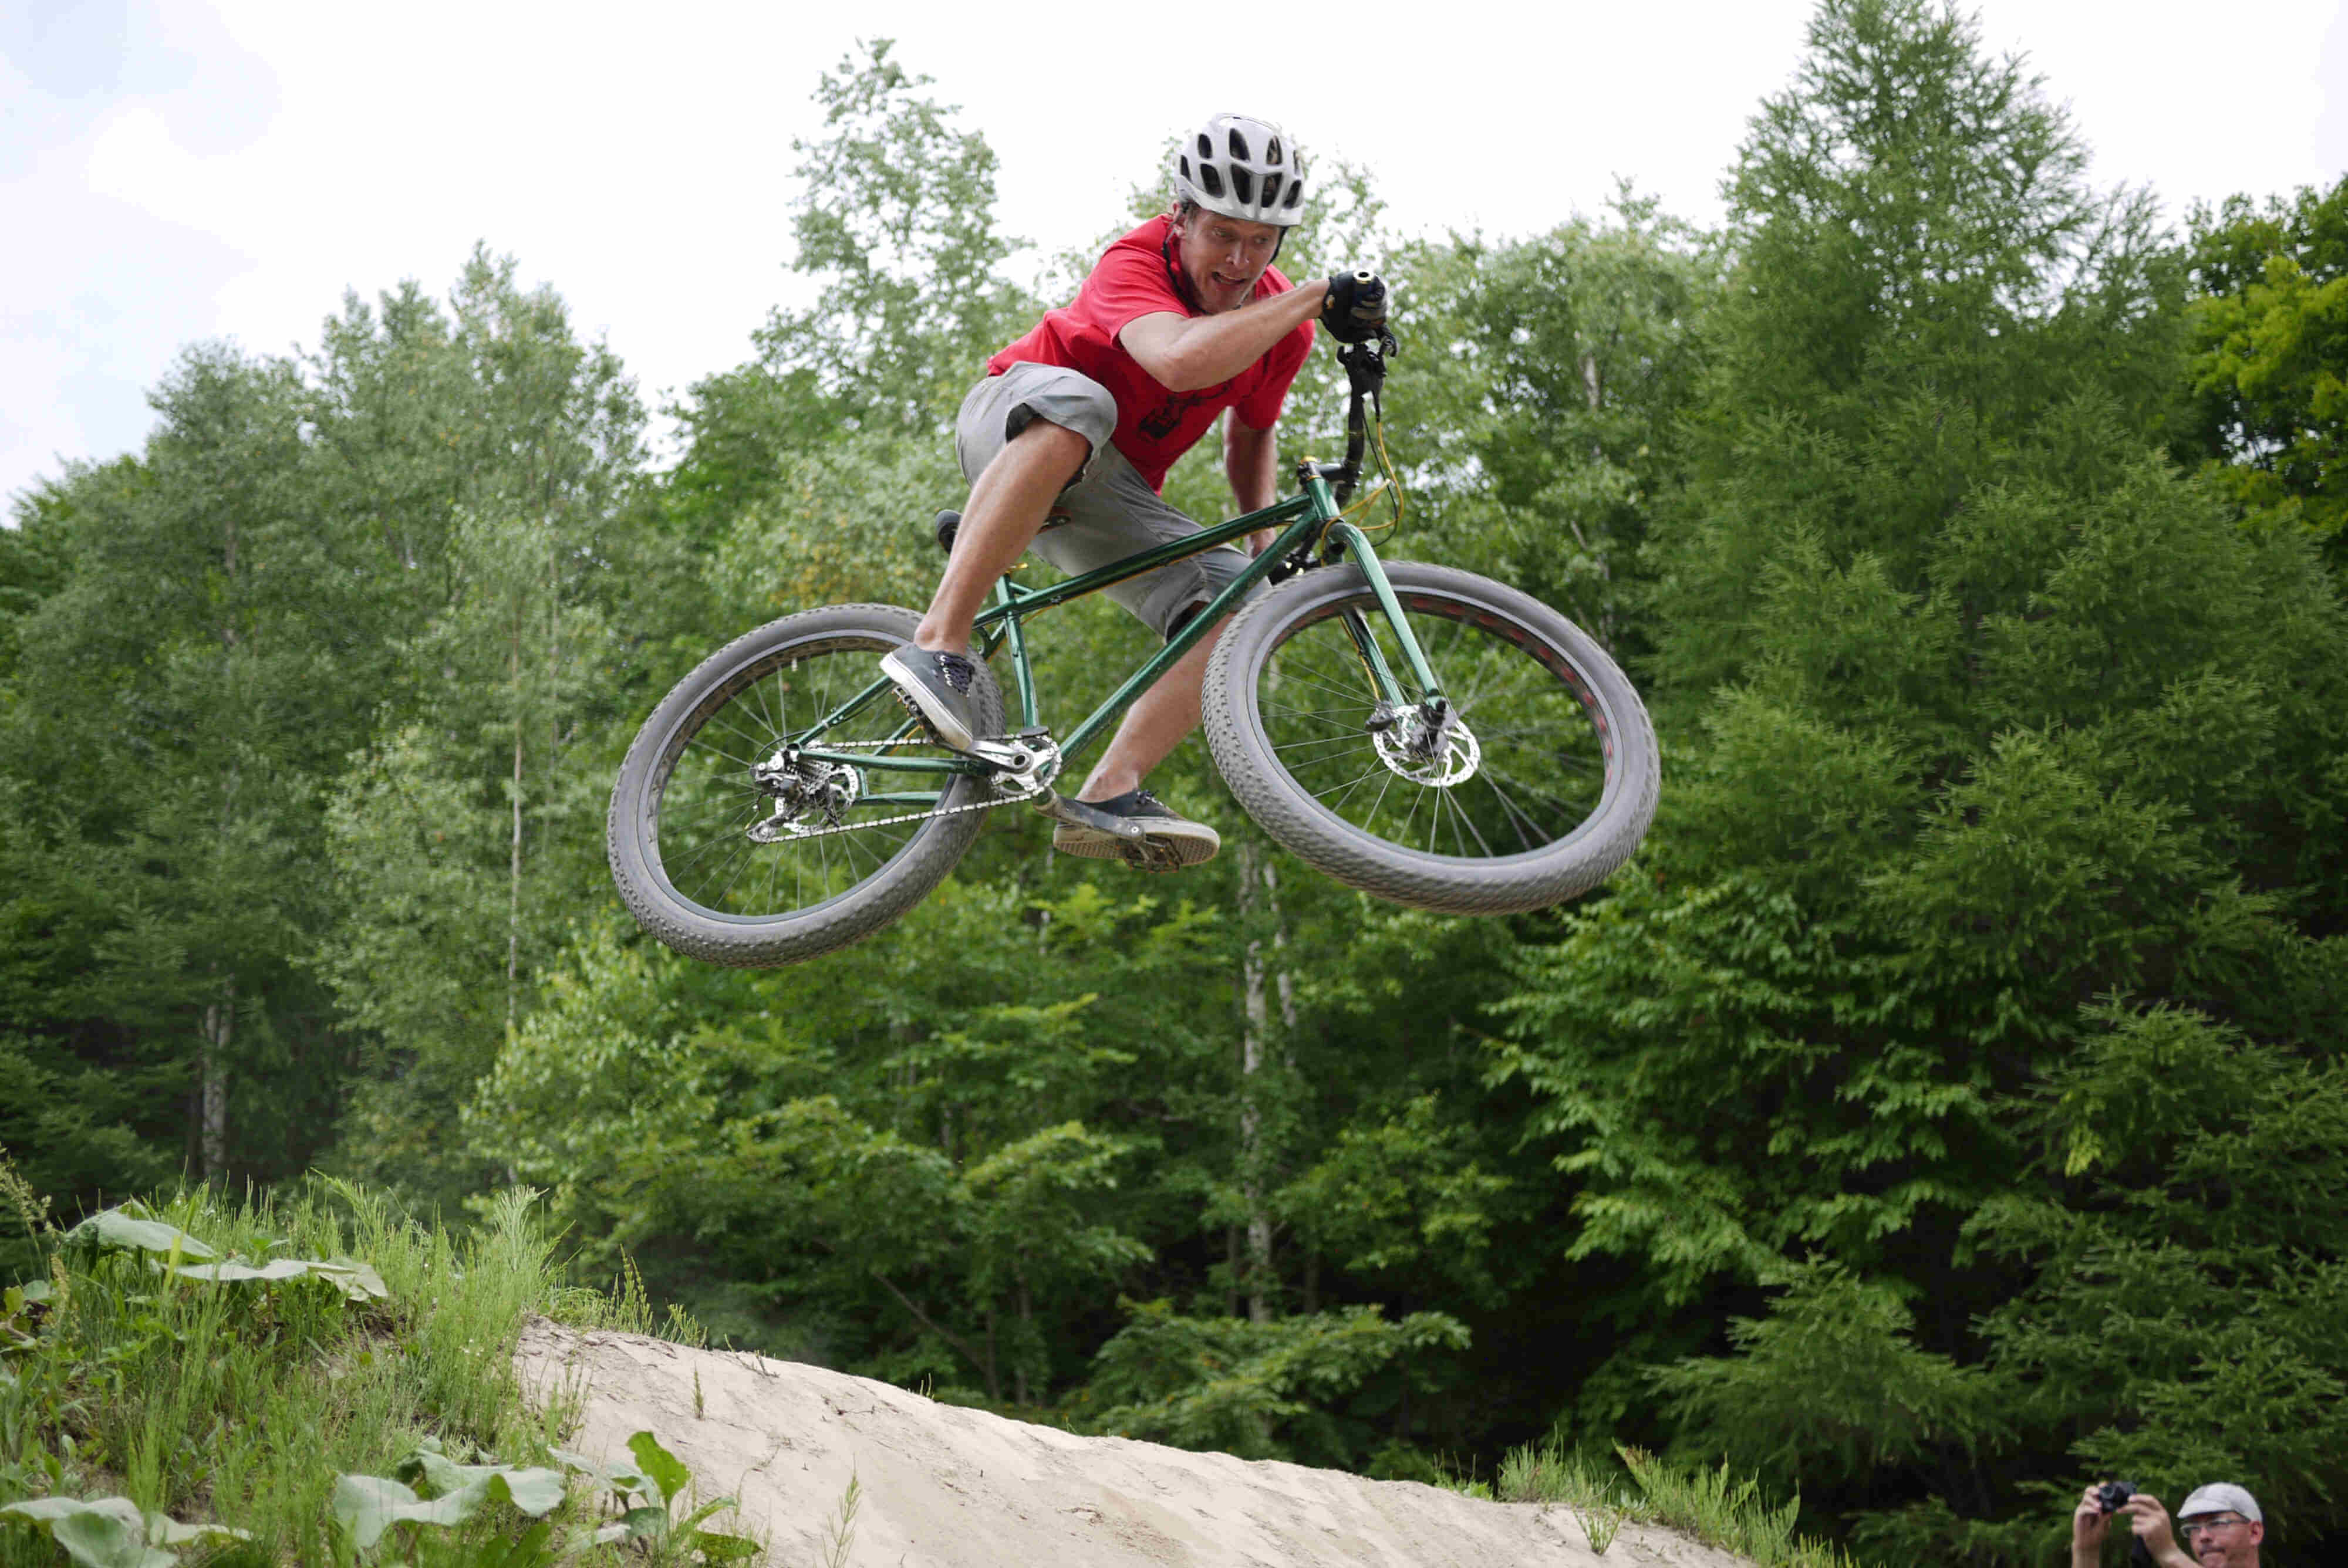 Right side view of a cyclist, on a green Surly Krampus bike, launching off of a dirt ramp with trees in the background